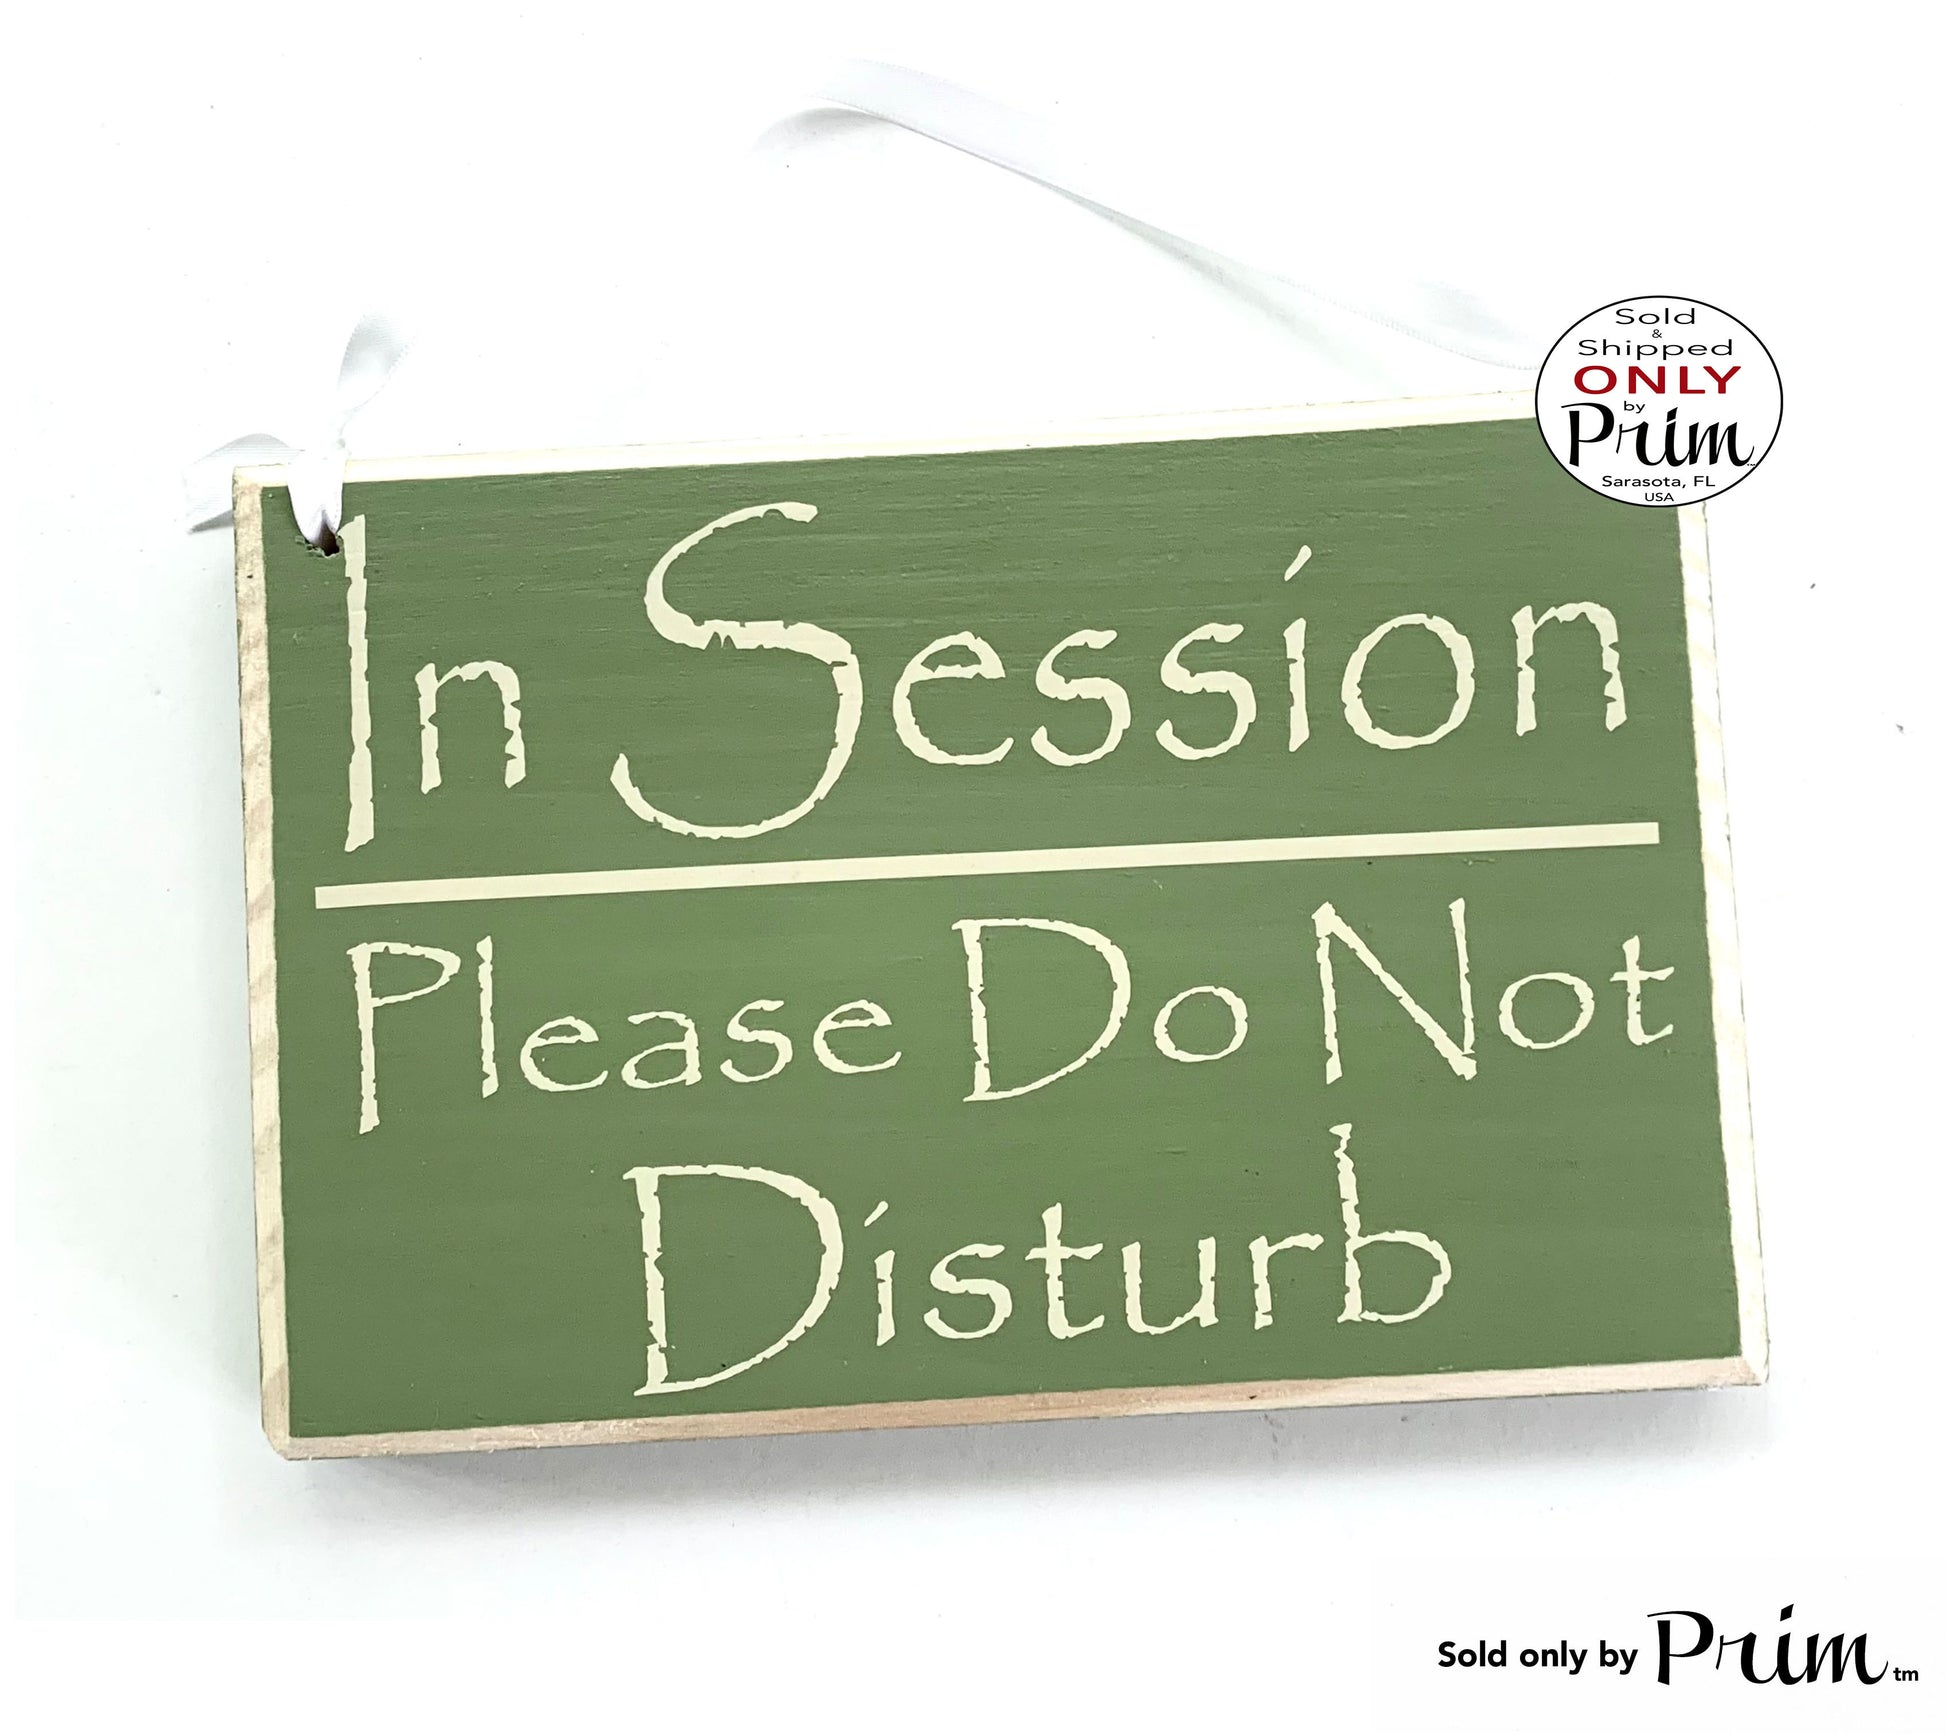 8x6 In Session Please Do Not Disturb Custom Wood Sign Unavailable In a Meeting Busy Office Treatment Working Progress Wall Door Plaque Designs by Prim